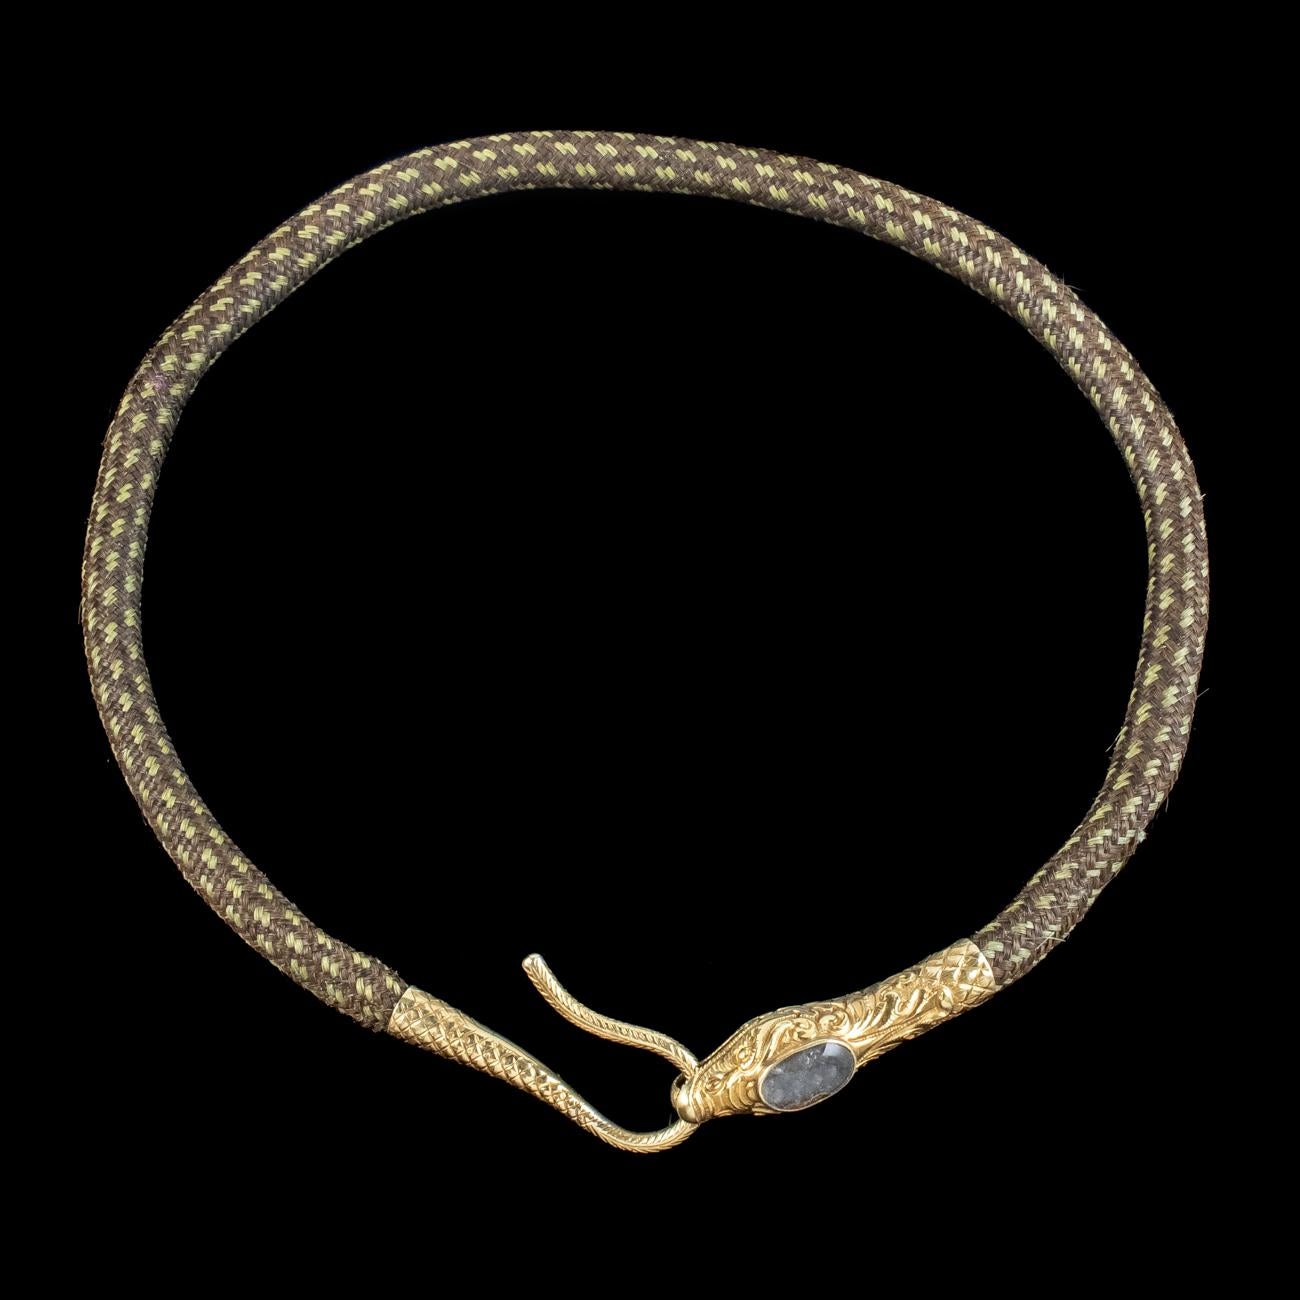 An exquisite antique Georgian snake collar from the early 19th Century made up of three different shades of brown hair plaited beautifully to create one thick band.

The piece is finished with a fabulous 18ct gold snake head and tail which forms a